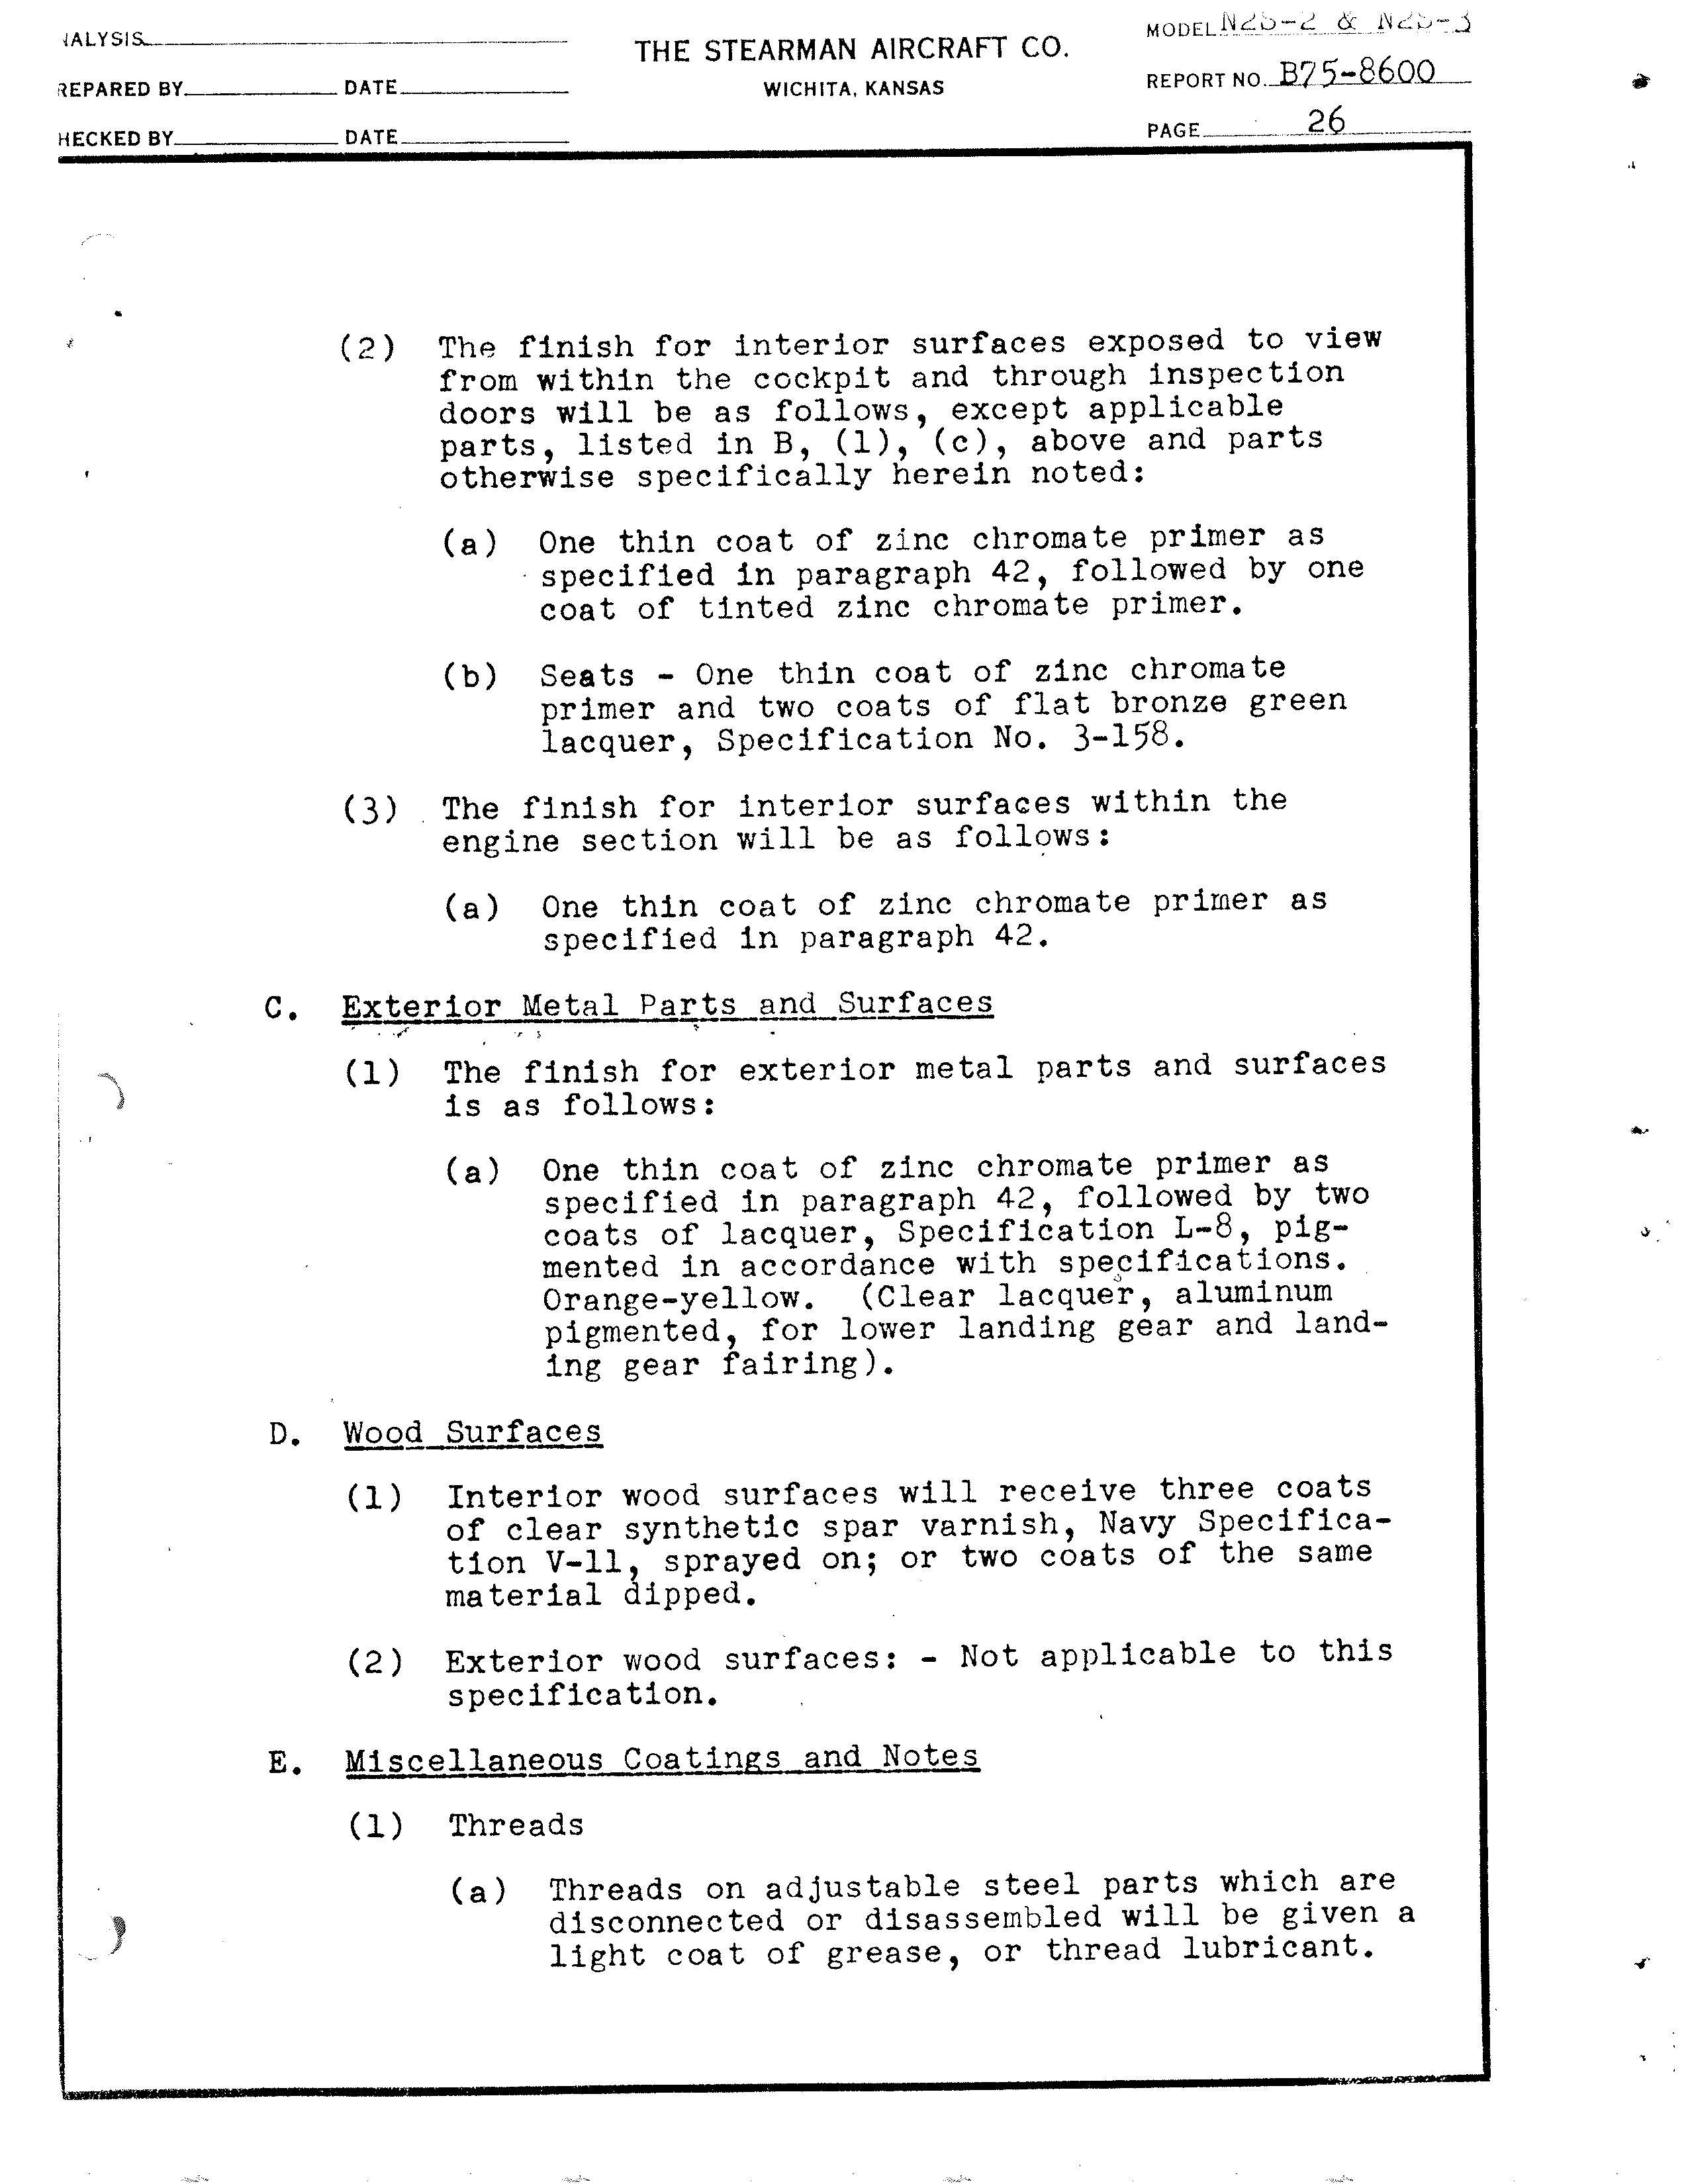 Sample page 196 from AirCorps Library document: Erection & Maintenance Manual - N2S Airplanes